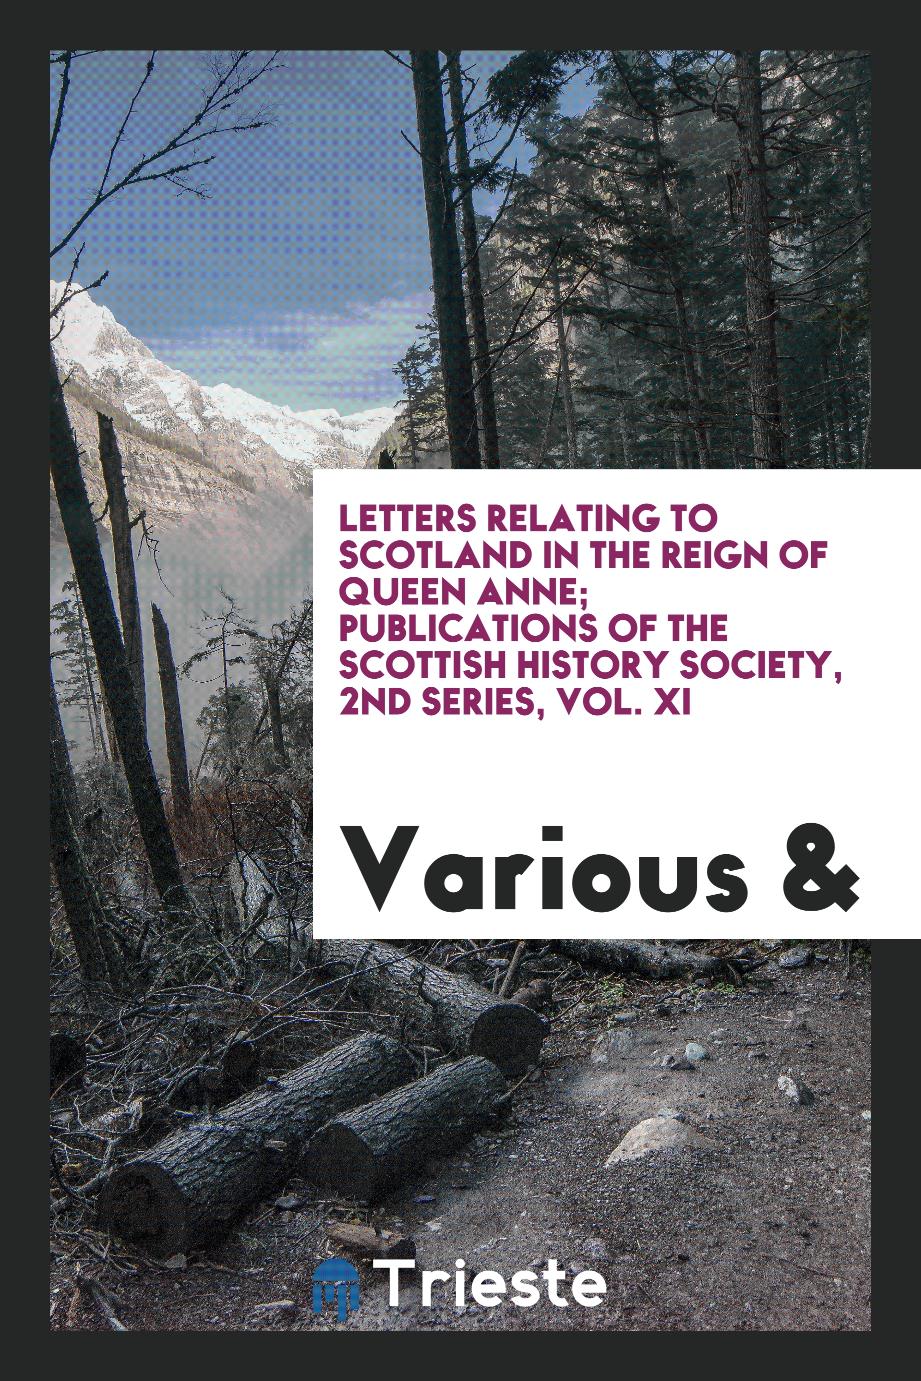 Letters relating to Scotland in the reign of Queen Anne; Publications of the Scottish History Society, 2nd Series, Vol. XI